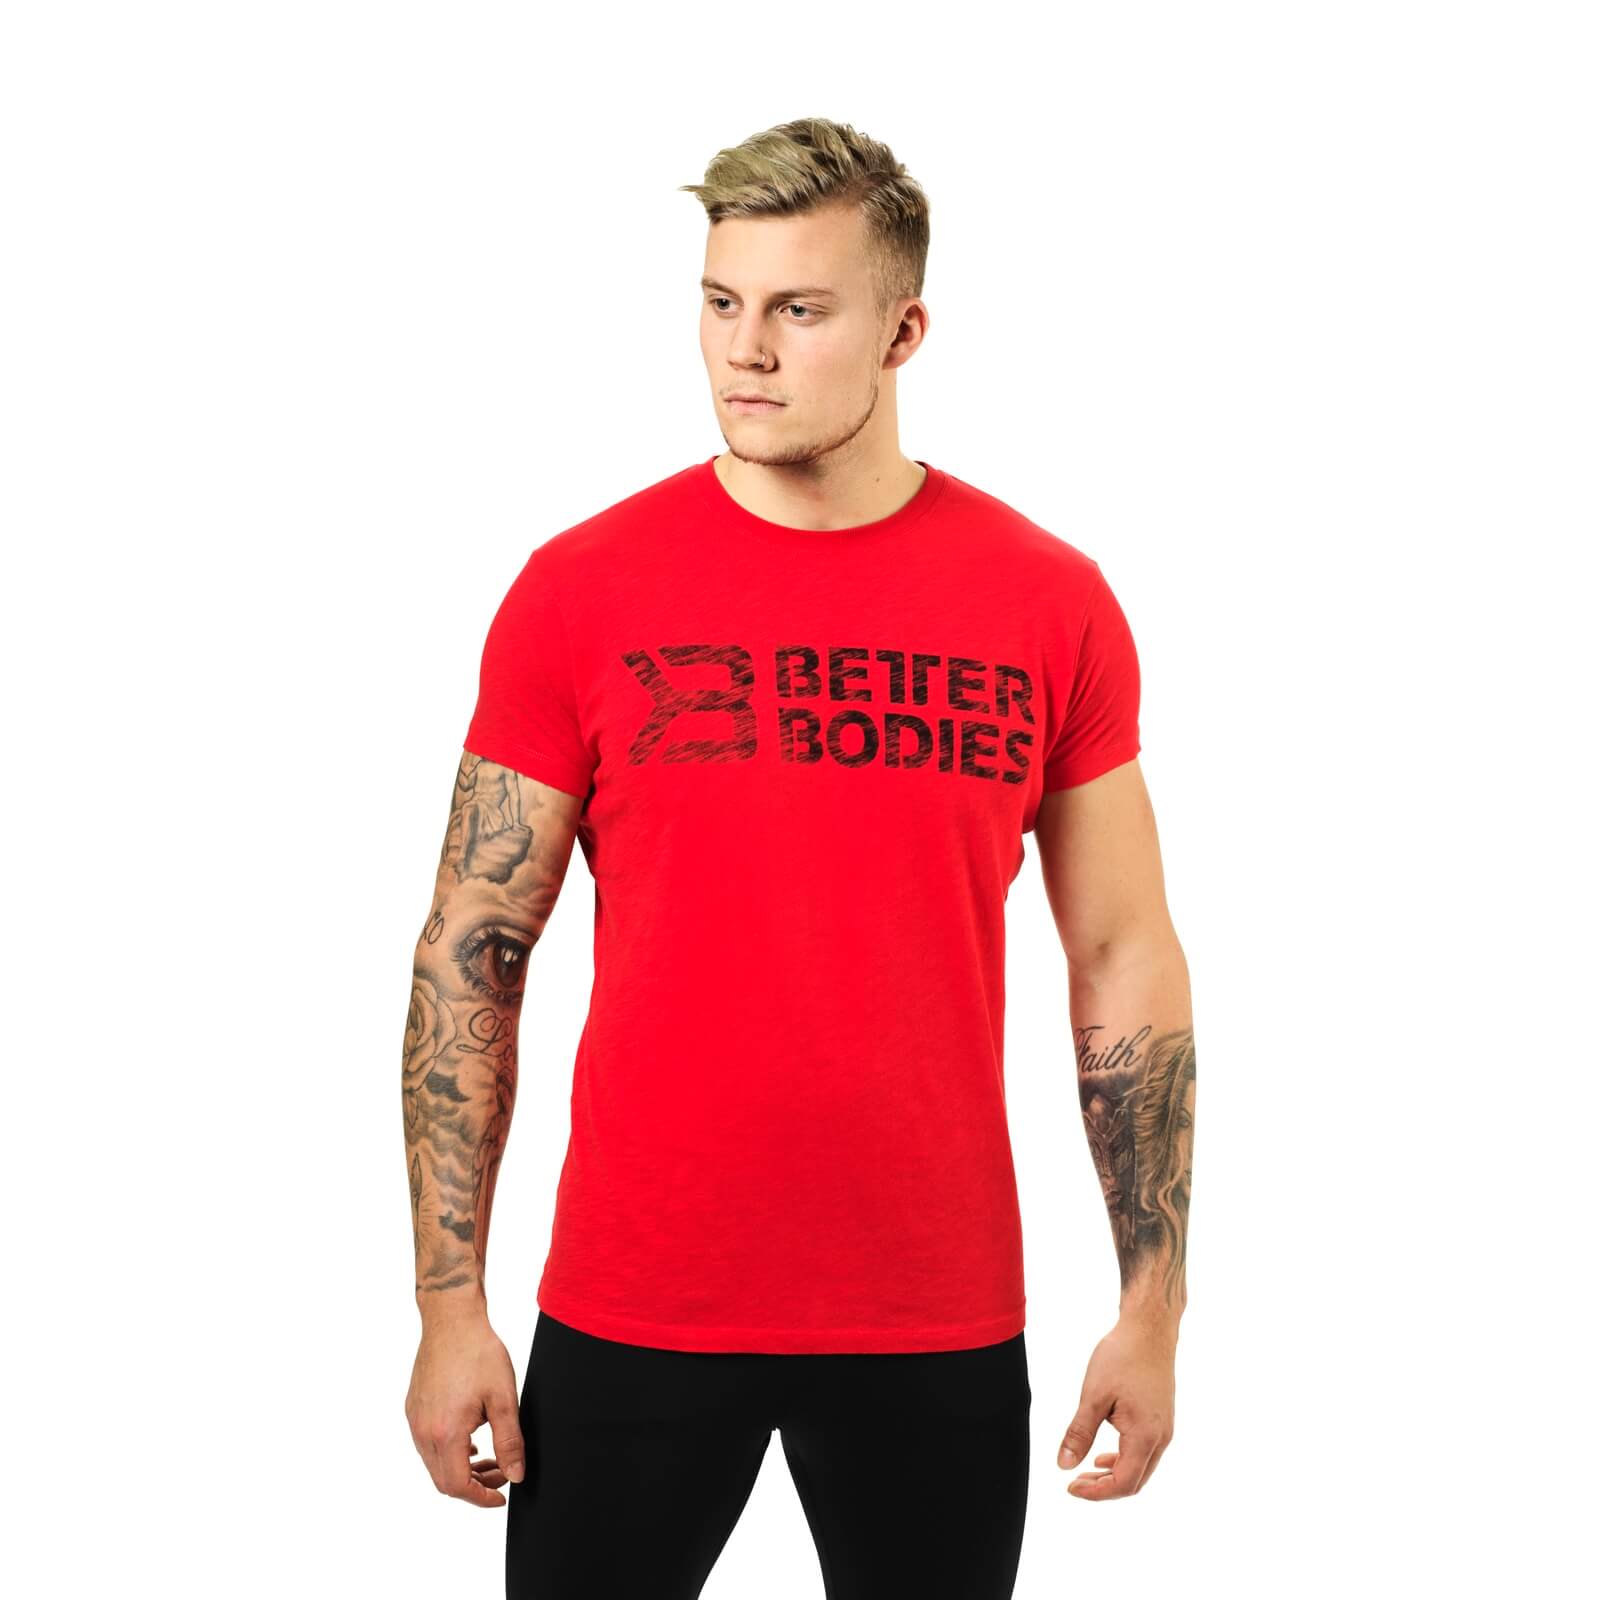 Symbol Printed Tee, bright red, Better Bodies